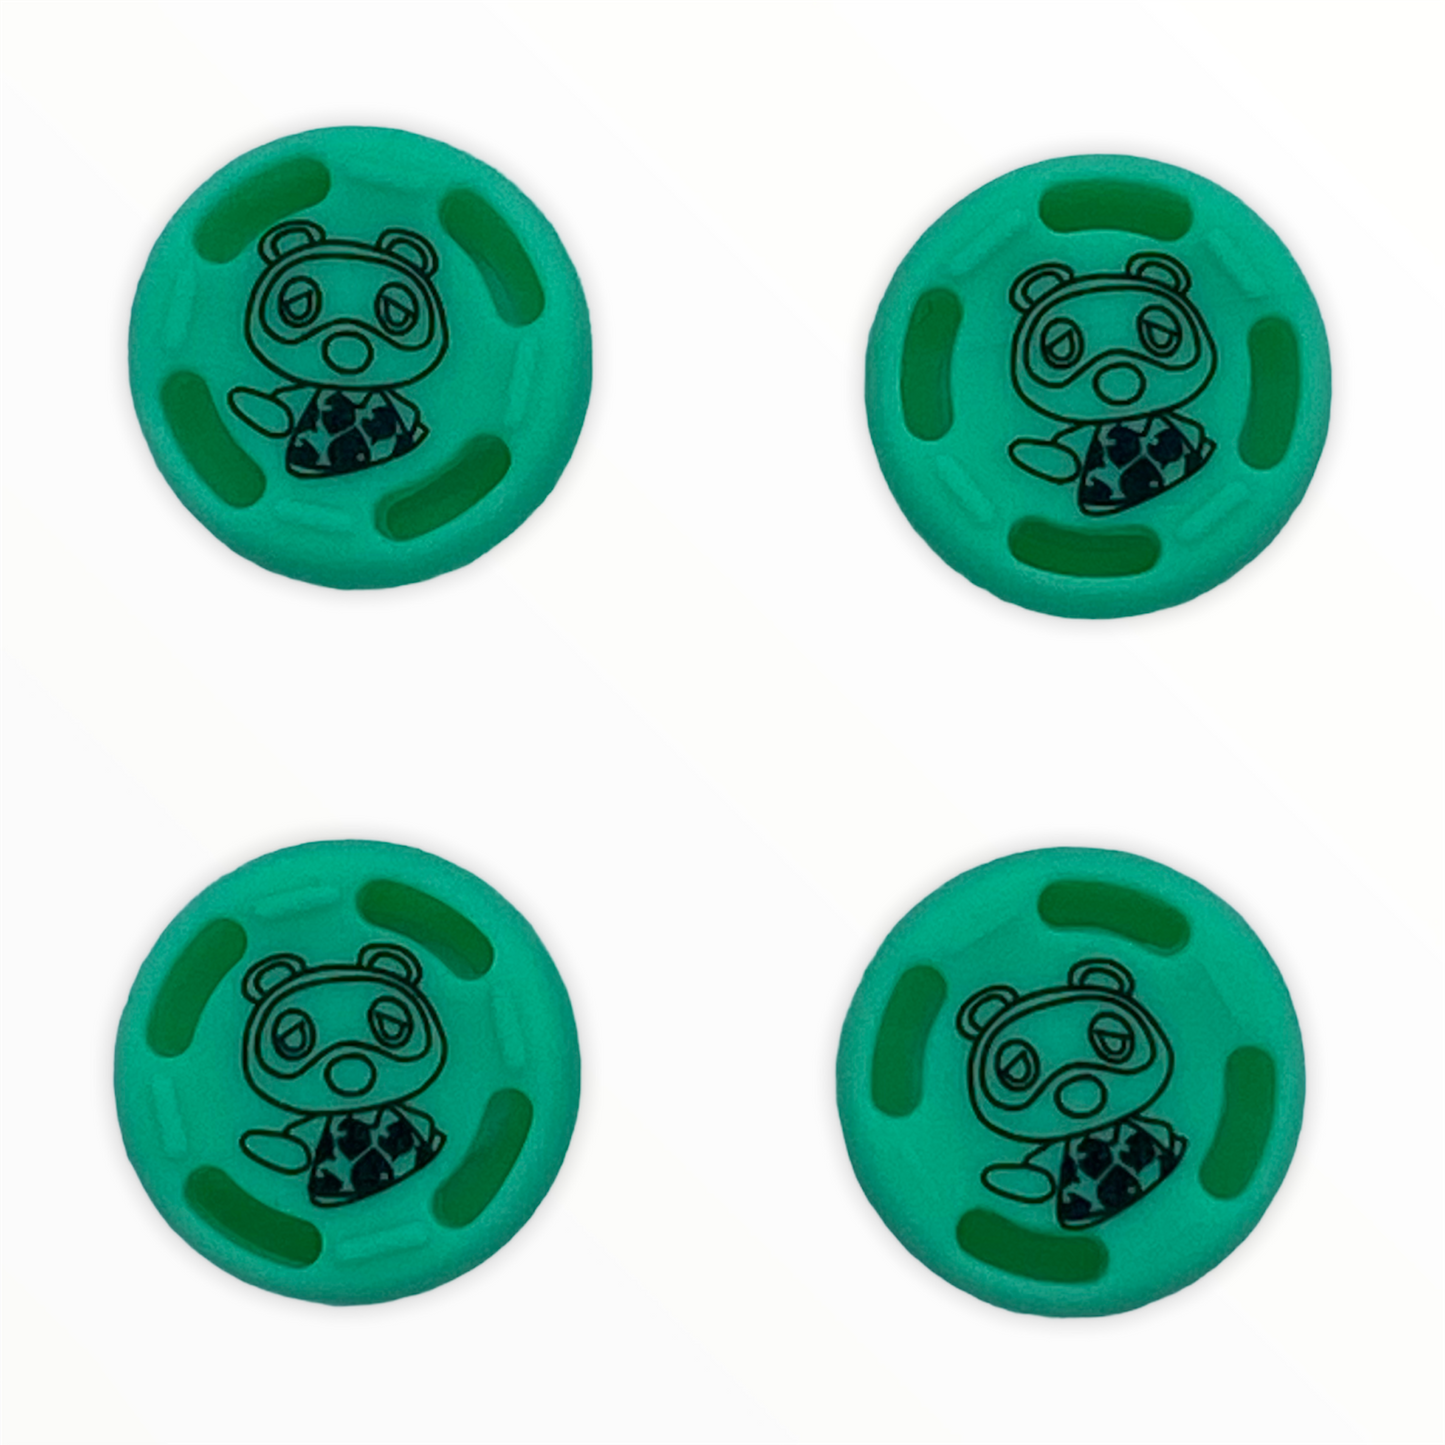 JenDore Green 4Pcs Raccoon Silicone Thumb Grip Caps for Nintendo Switch